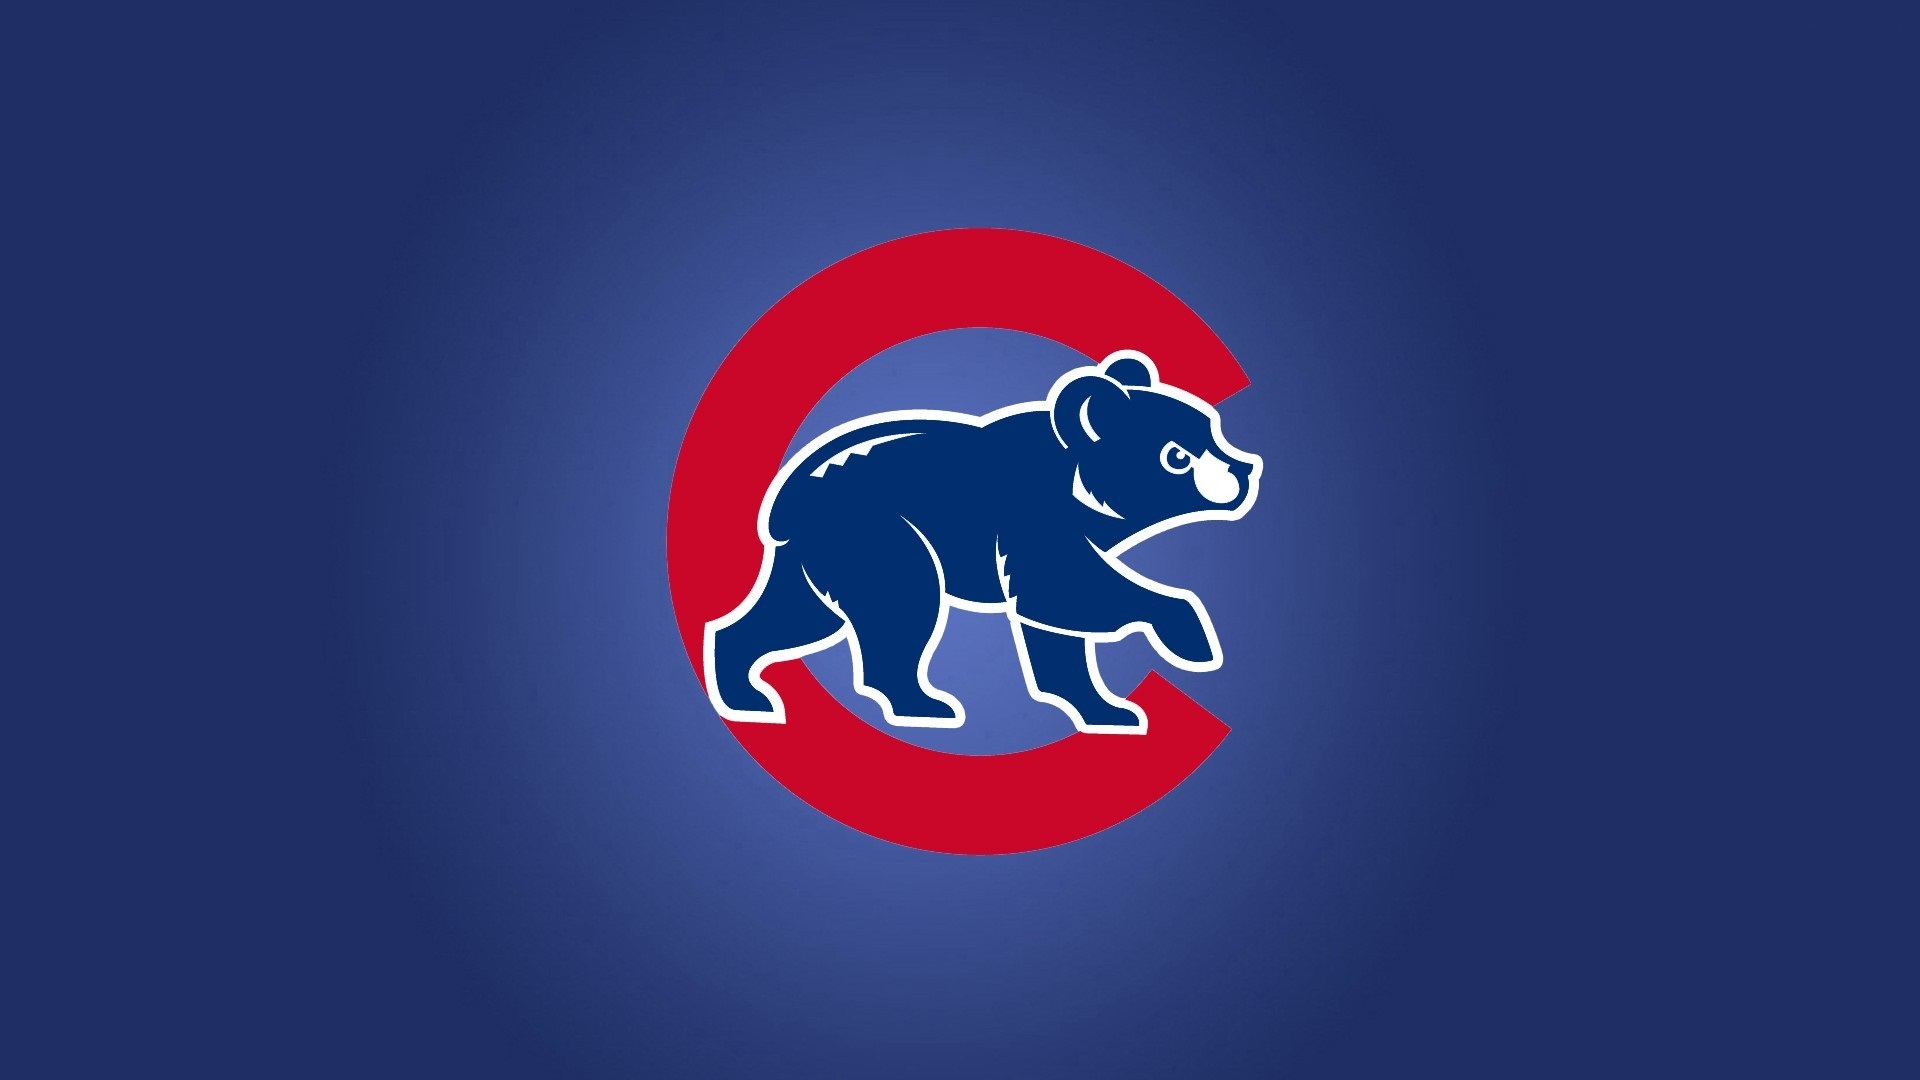 Chicago Cubs MLB For Desktop Wallpaper With high-resolution 1920X1080 pixel. You can use this wallpaper for Mac Desktop Wallpaper, Laptop Screensavers, Android Wallpapers, Tablet or iPhone Home Screen and another mobile phone device